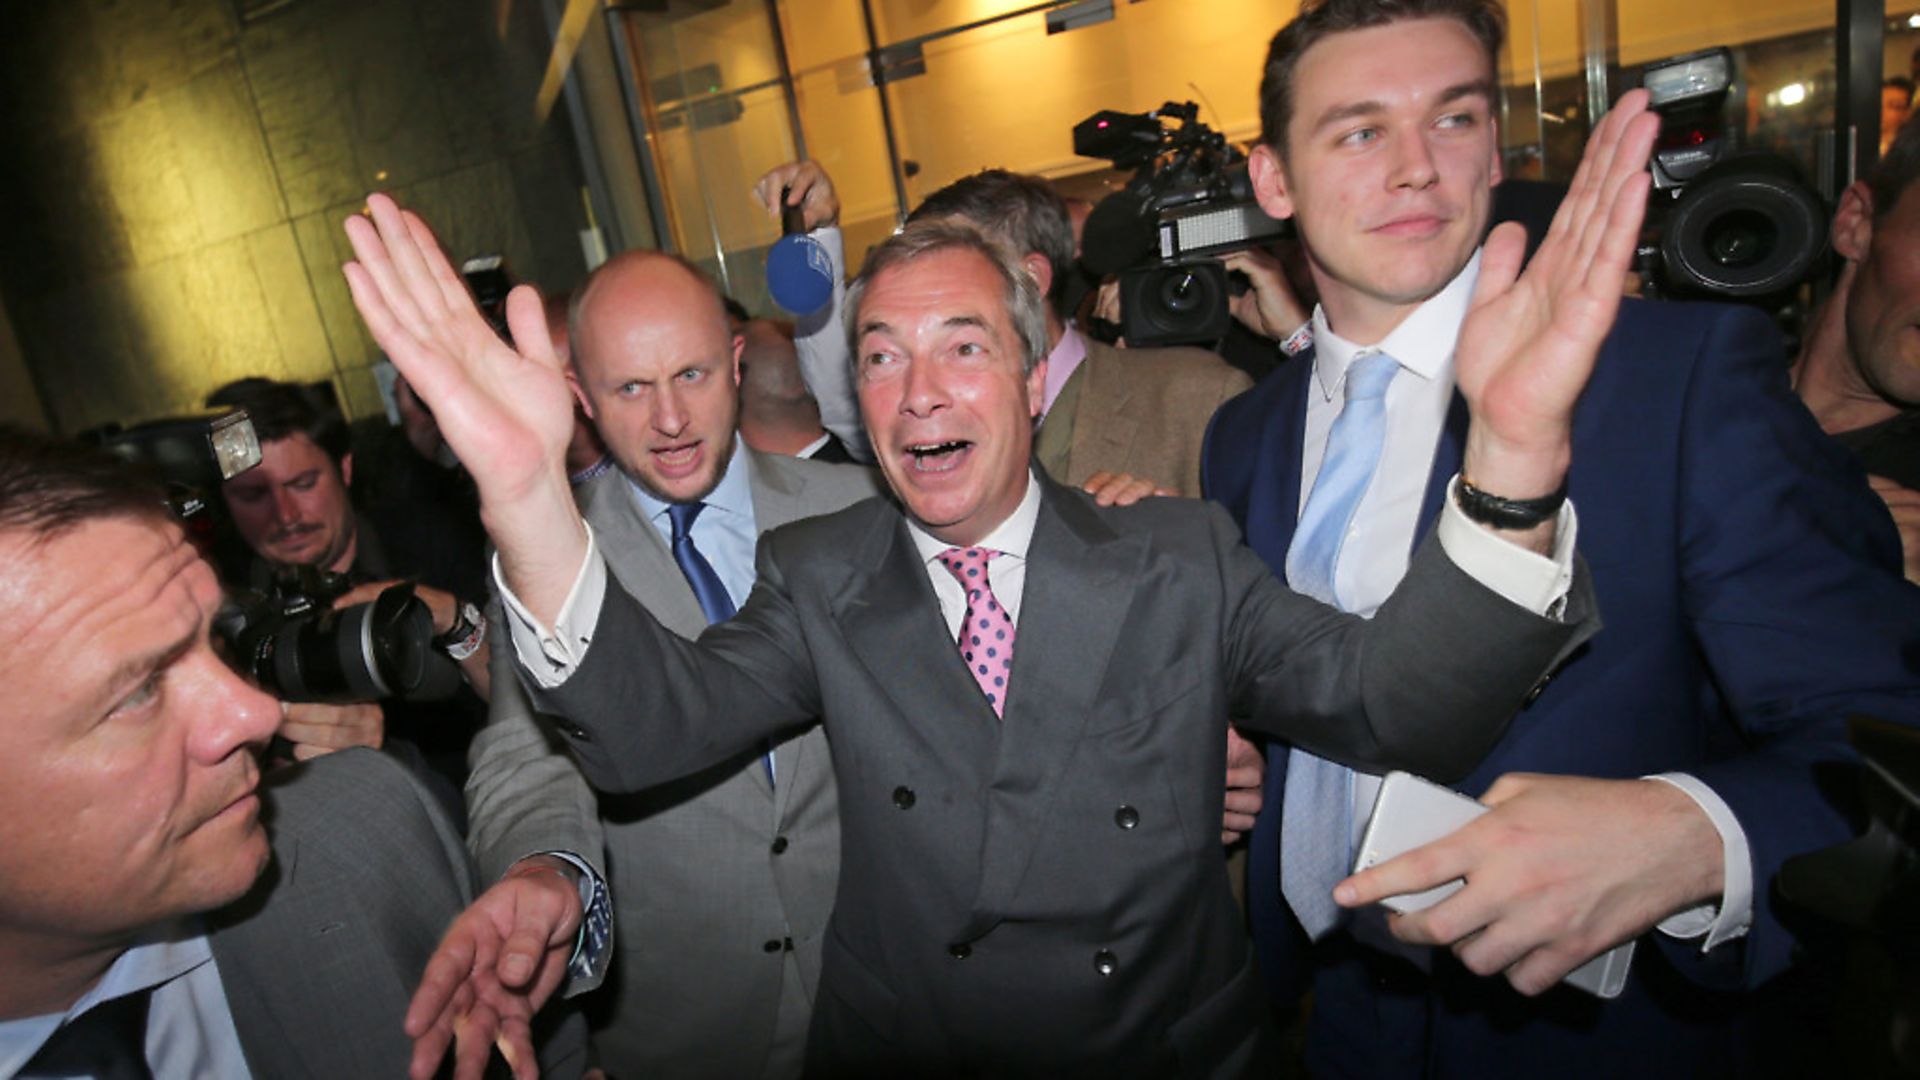 Nigel Farage reacts to the Brexit vote following the EU referendum. PHOTO: MICHAEL KAPPELER/ DPA. - Credit: DPA/PA Images